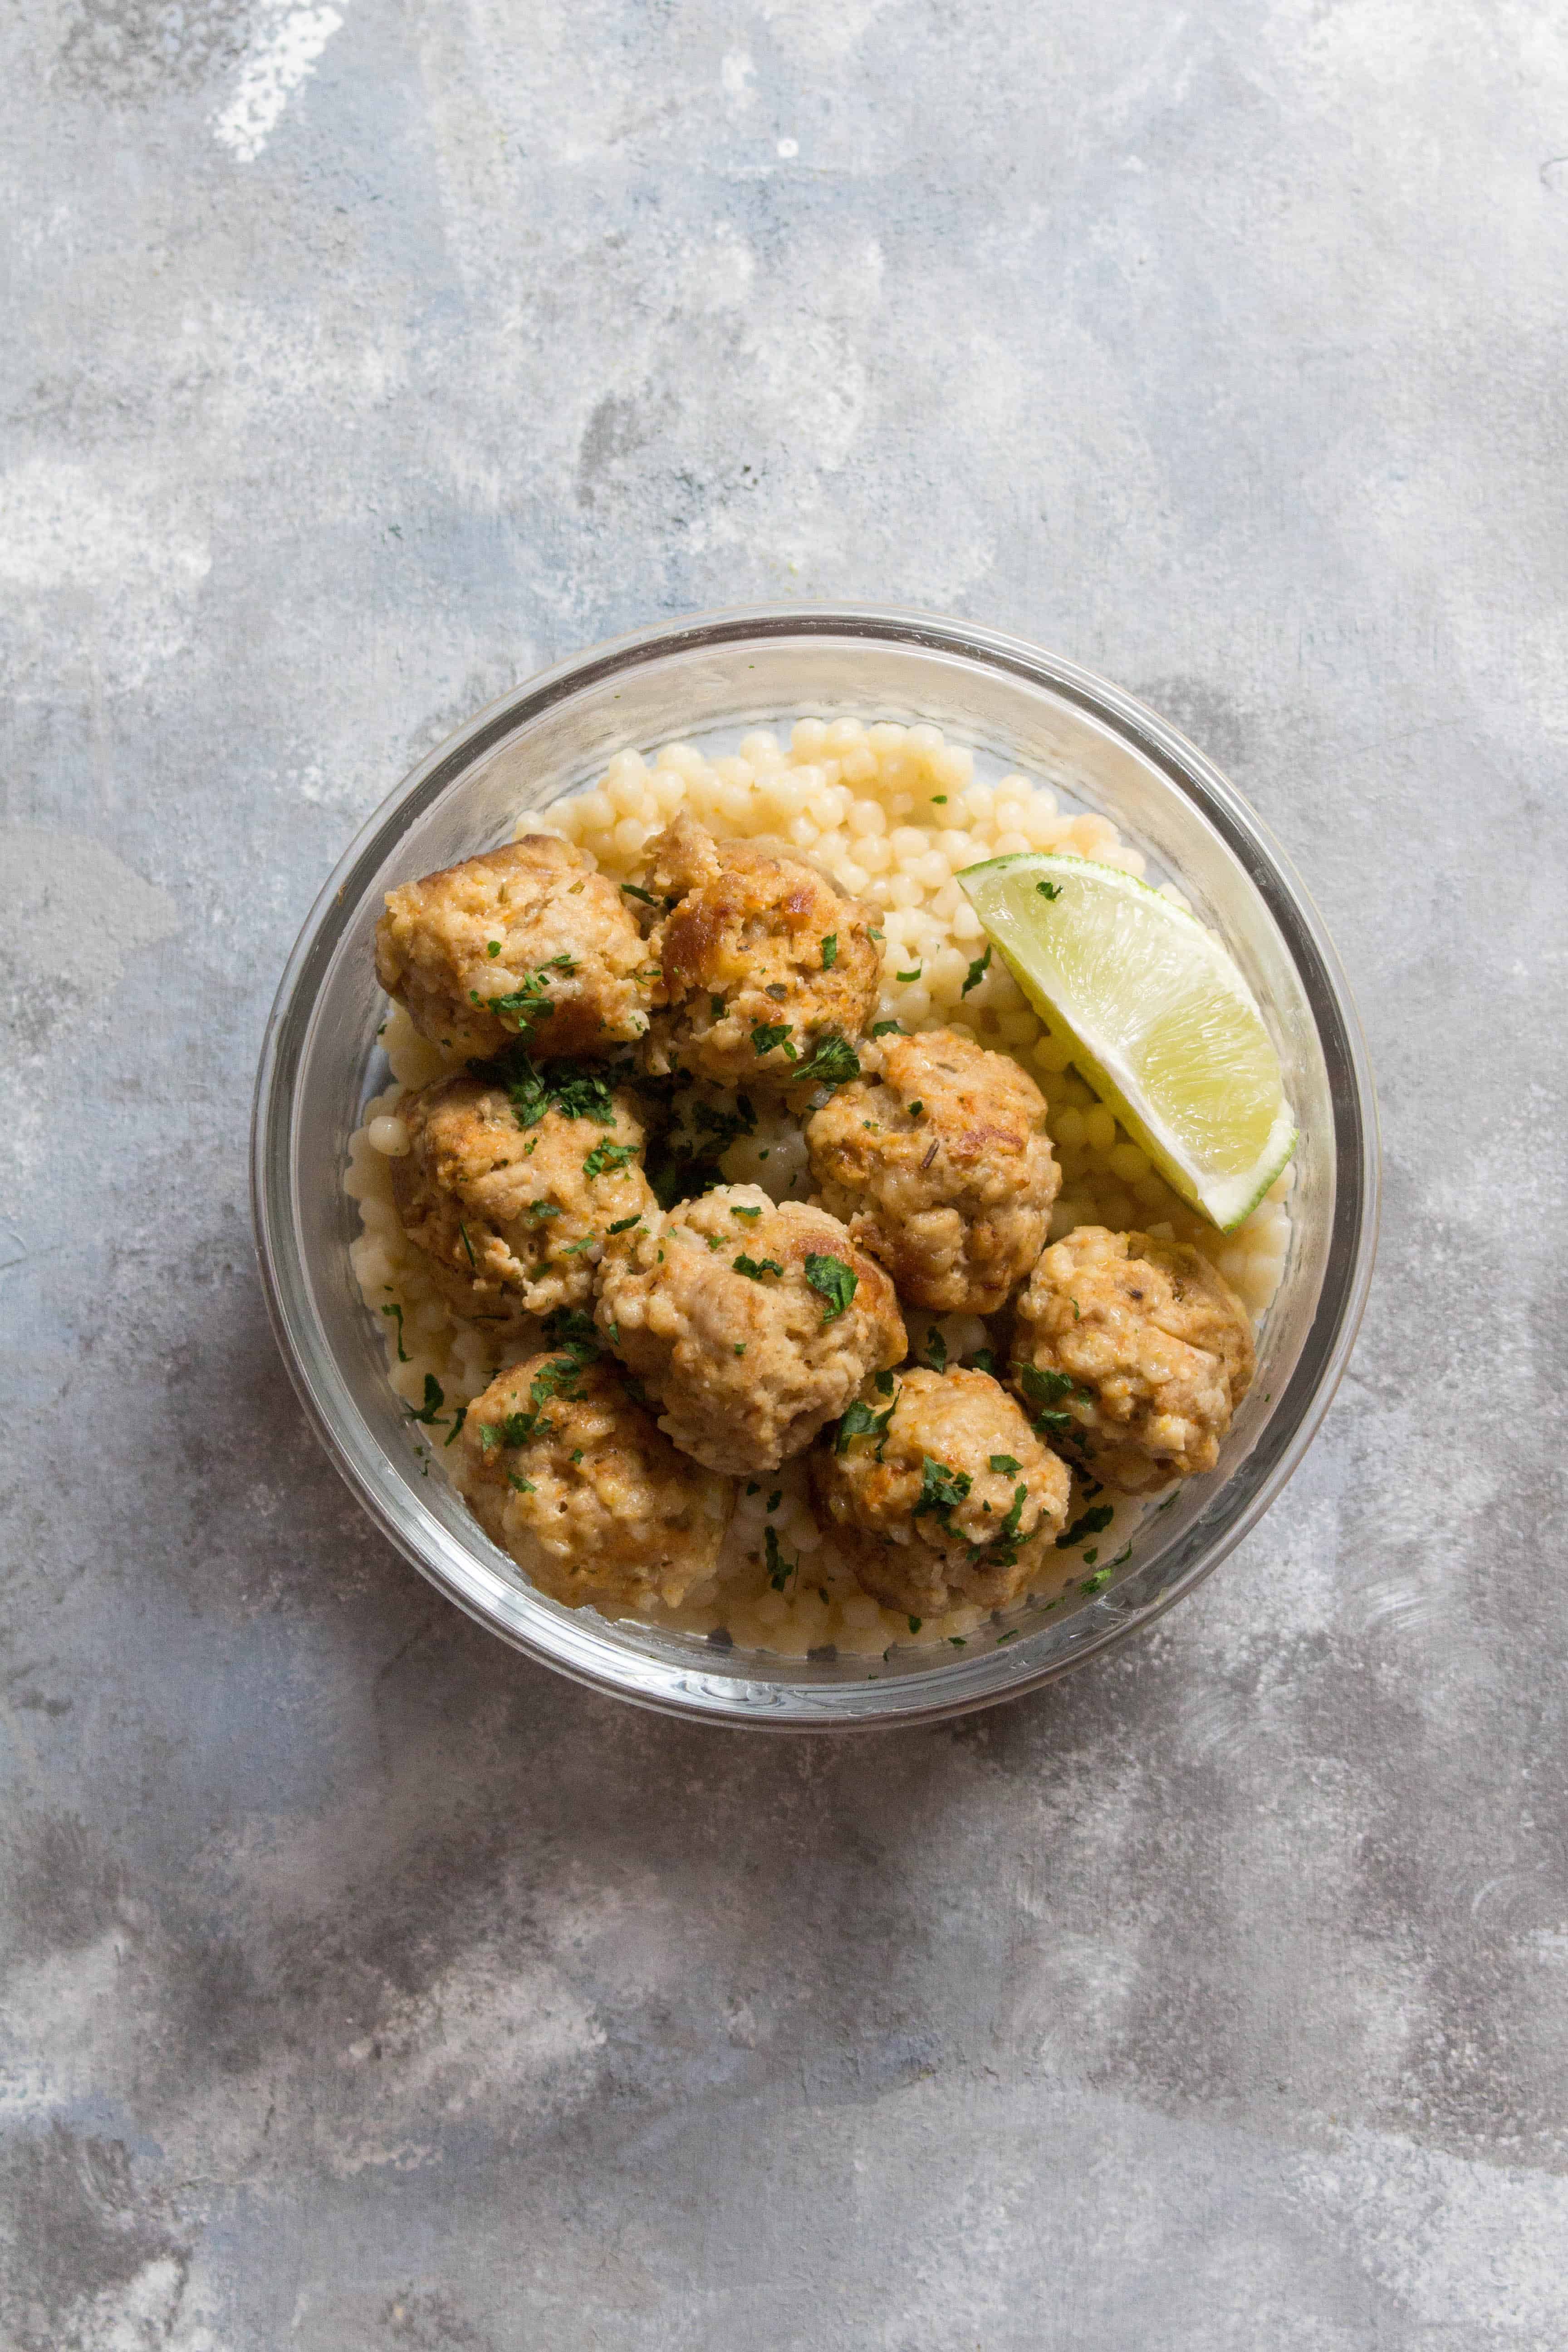 In less than 30 minutes, you can have this Instant Pot Meatball and Couscous Meal Prep ready to go! These turkey meatballs are not only delicious but this meal prep is fast, easy, and healthy!  